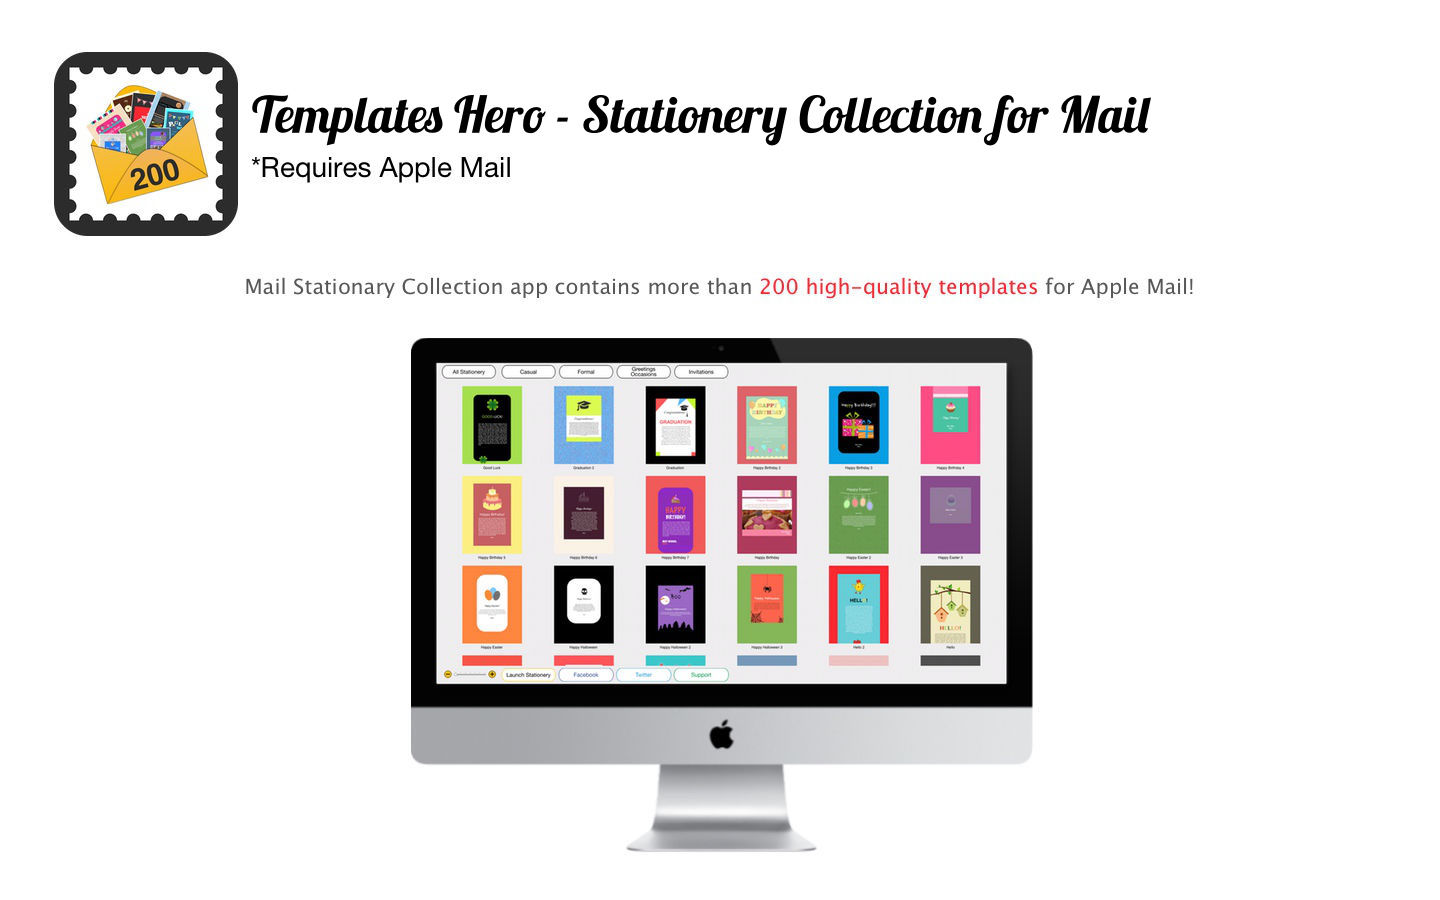 Templates Hero - Stationery Collection for Mail 1.1 : Main Window